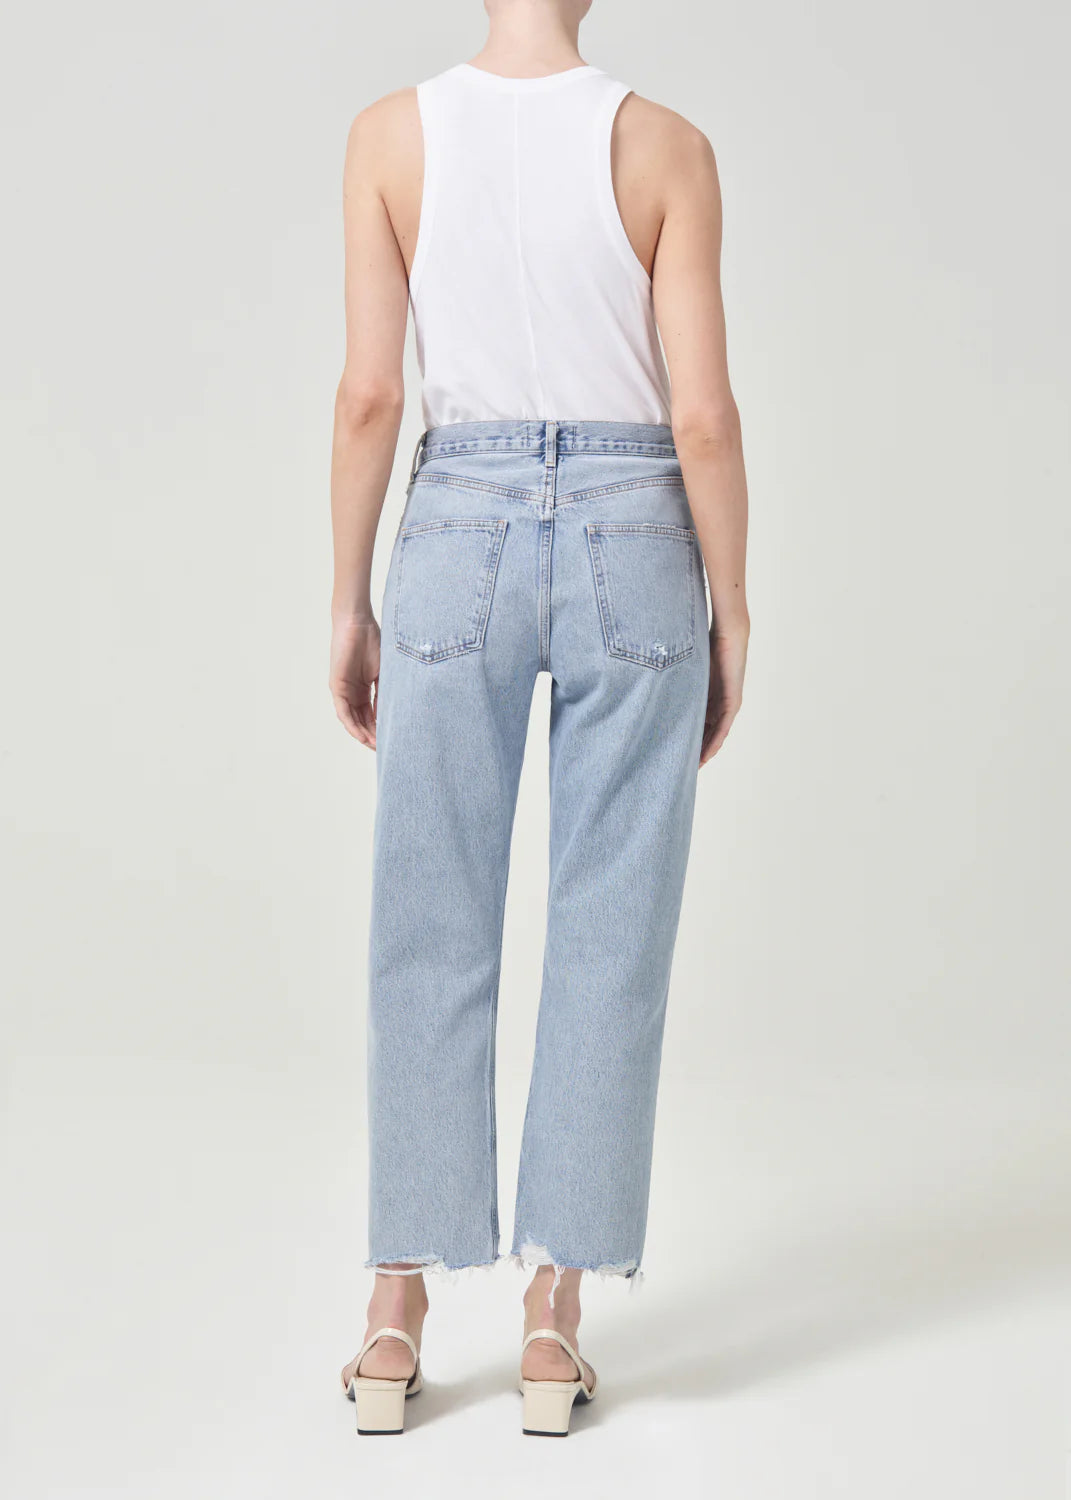 Agolde 90's crop pant in nerve (organic cotton)